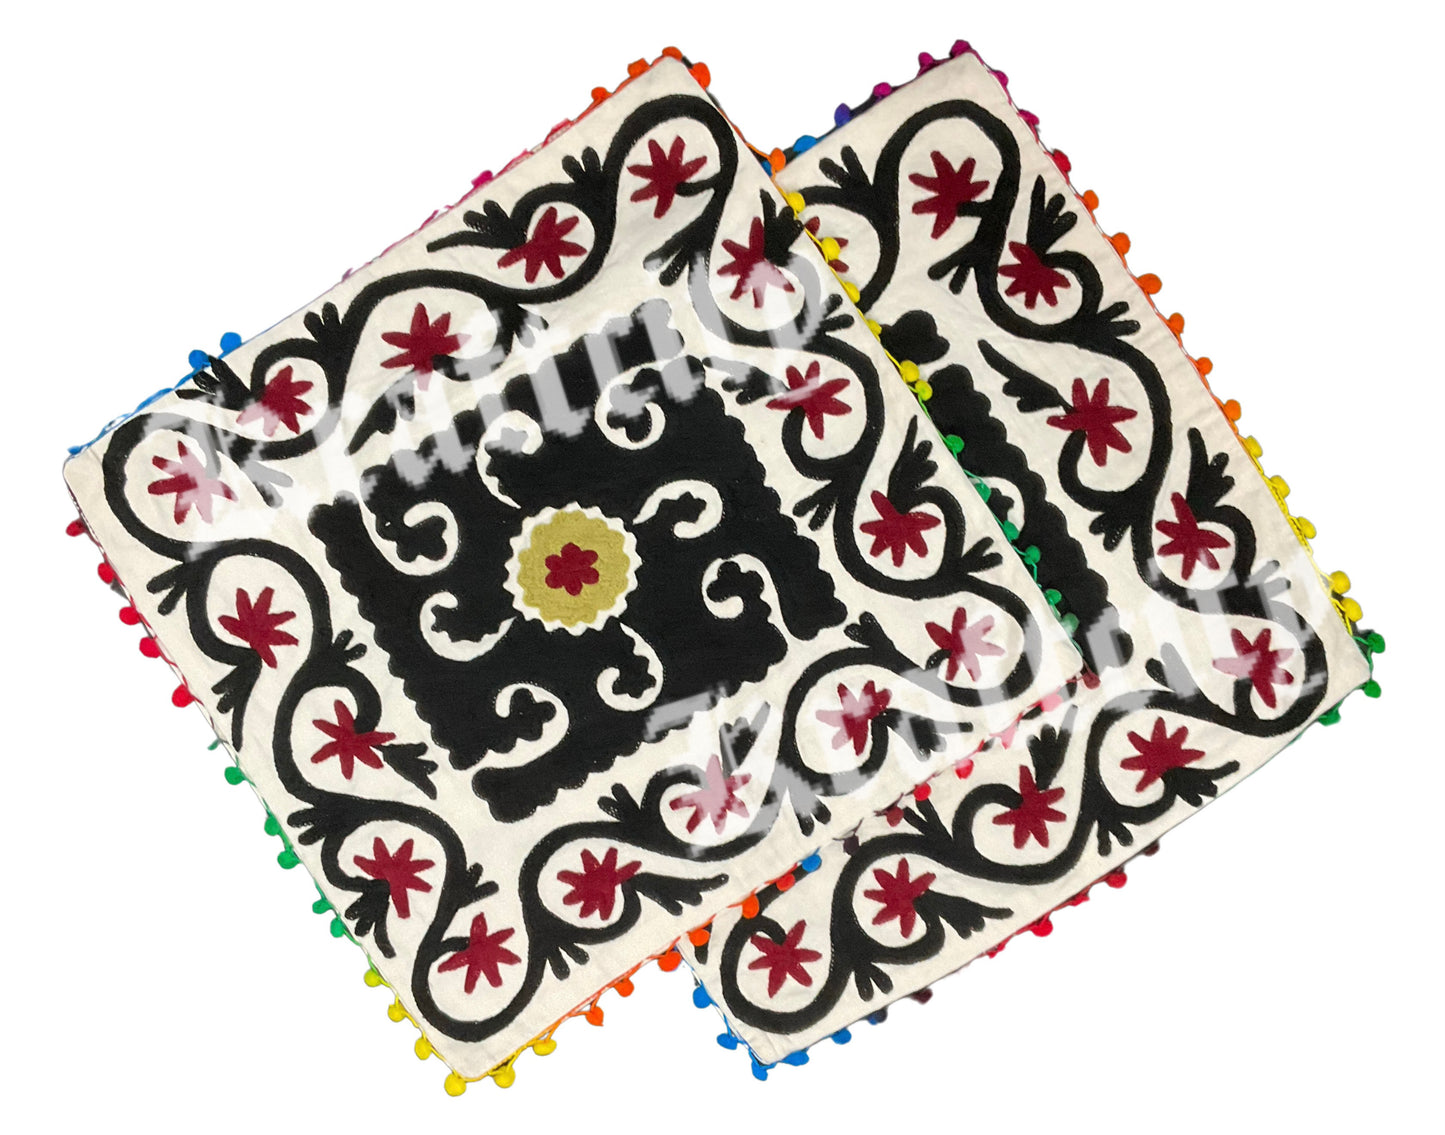 Embroided Suzani Cushion Cover Black/White Handmade Indian Pillow Cover (Each)